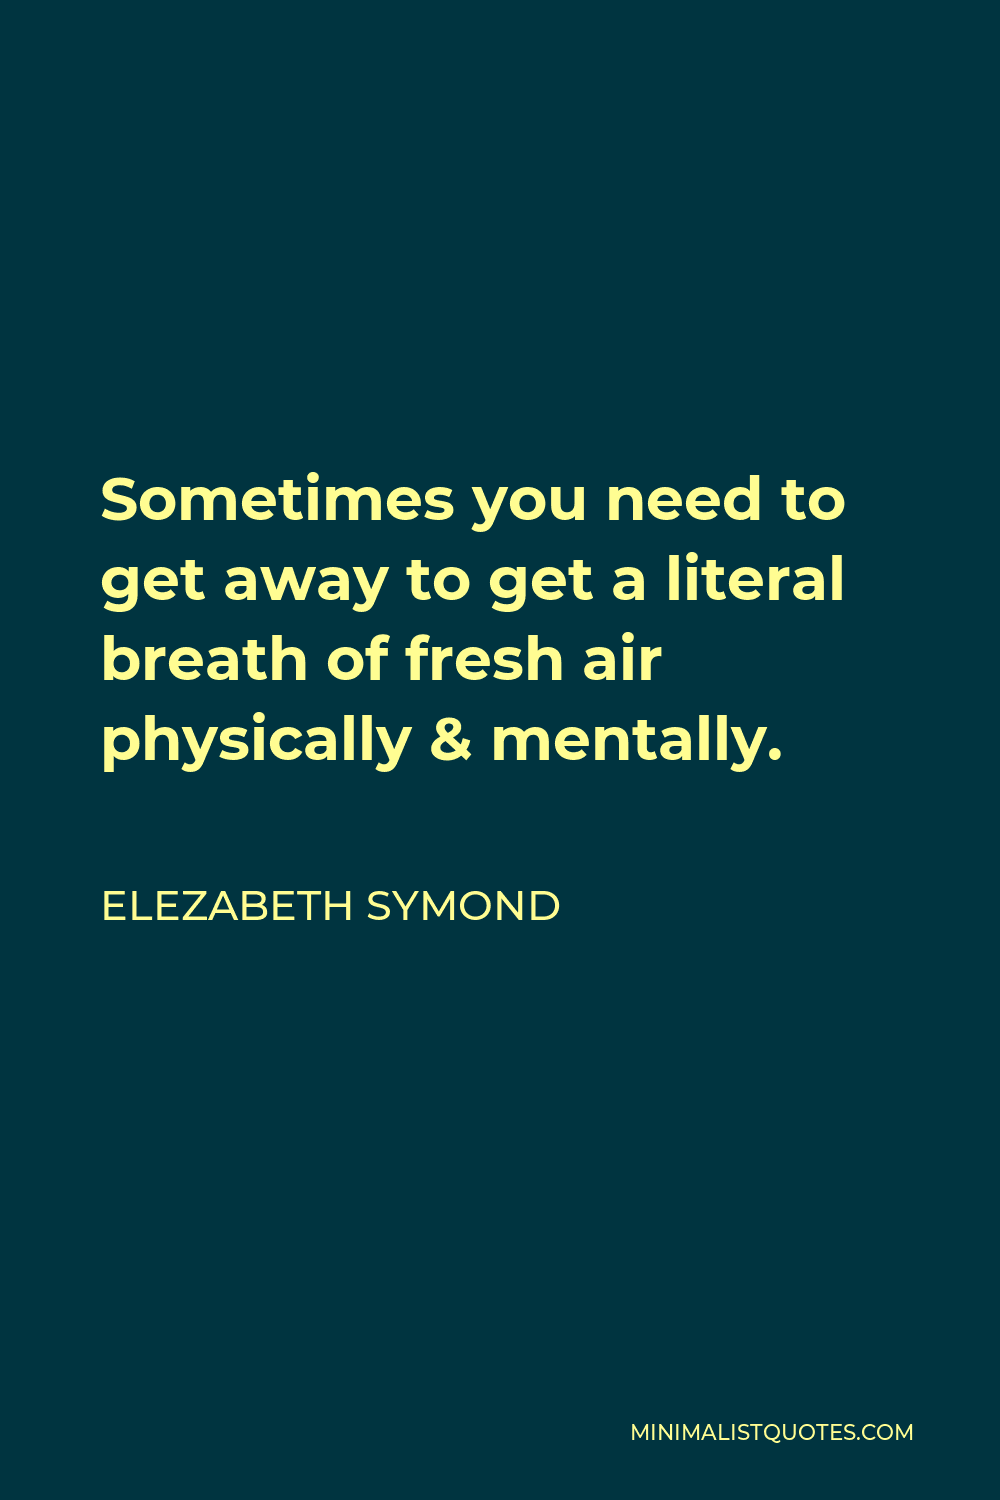 Elezabeth Symond Quote - Sometimes you need to get away to get a literal breath of fresh air physically & mentally.